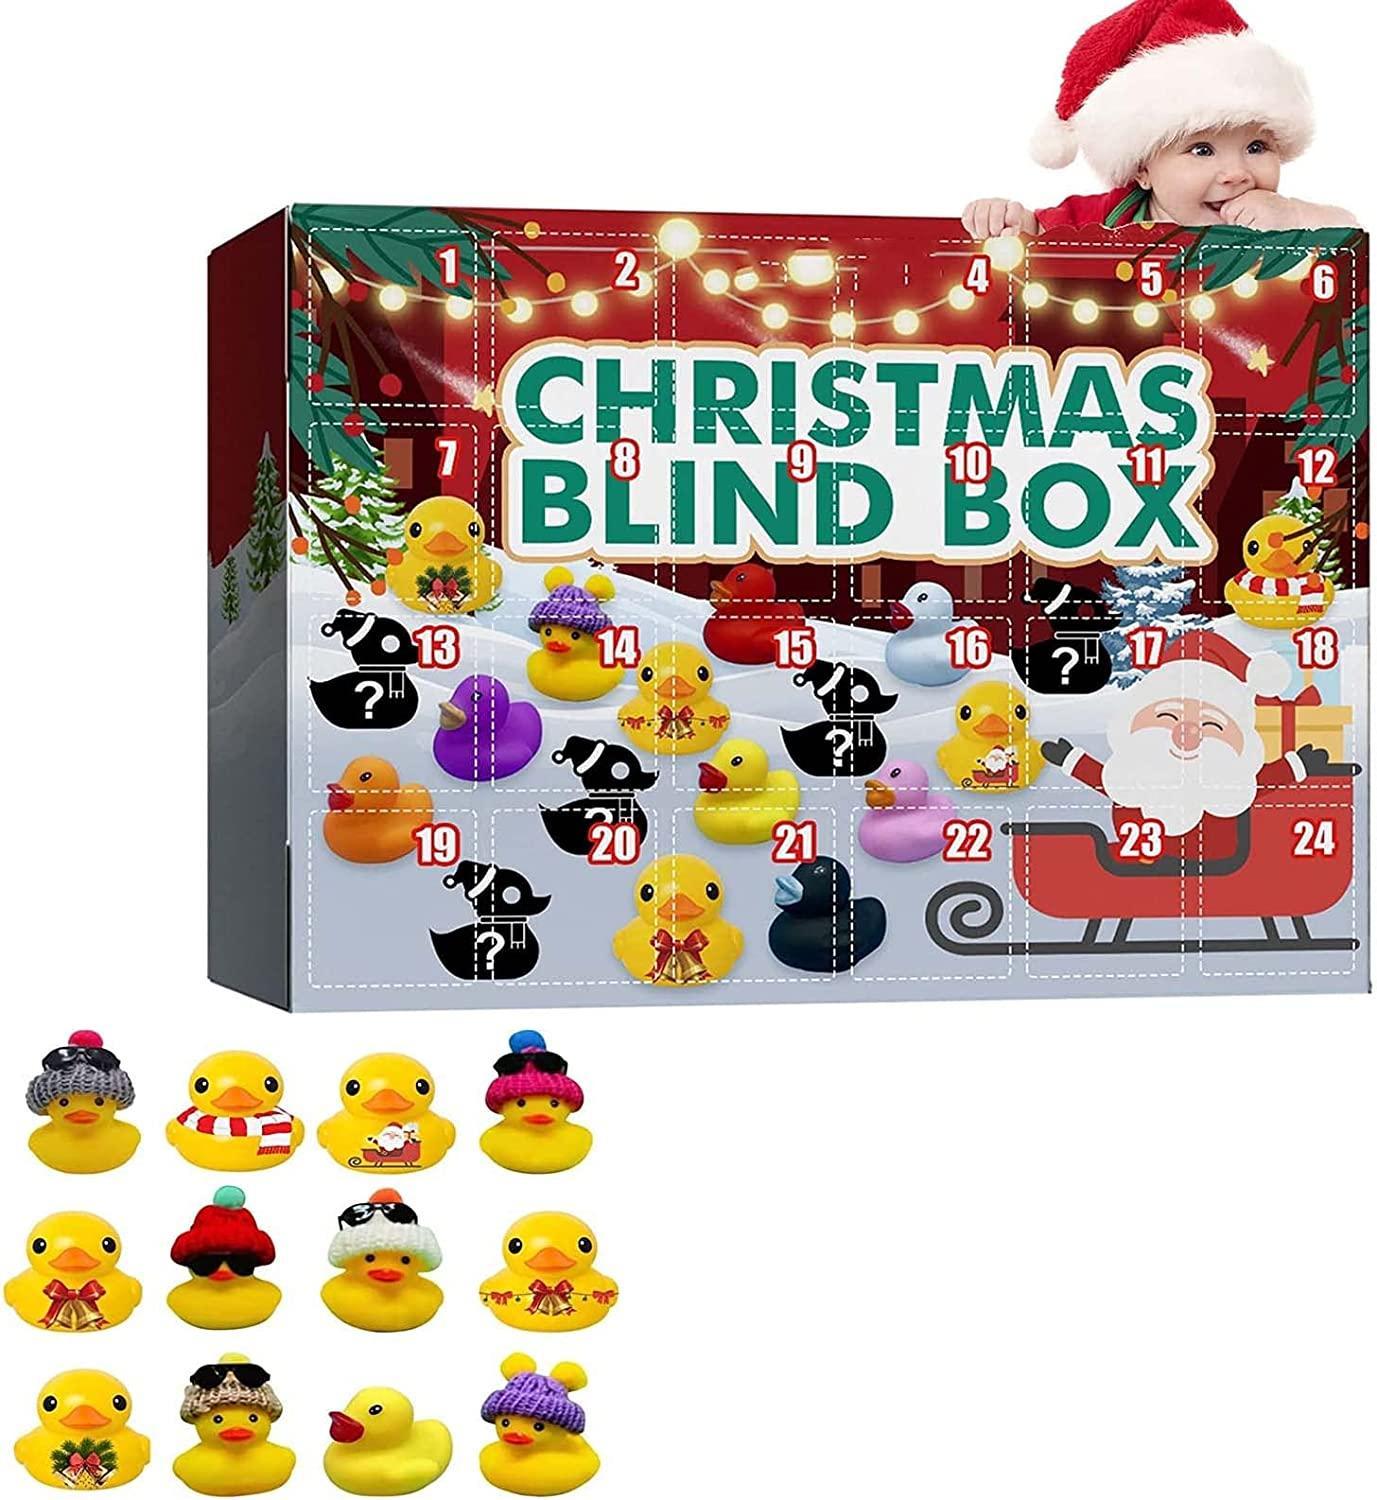 Christmas 24 Days Blind Box Countdown Advent Calendar with Rubber Ducks and Accessory